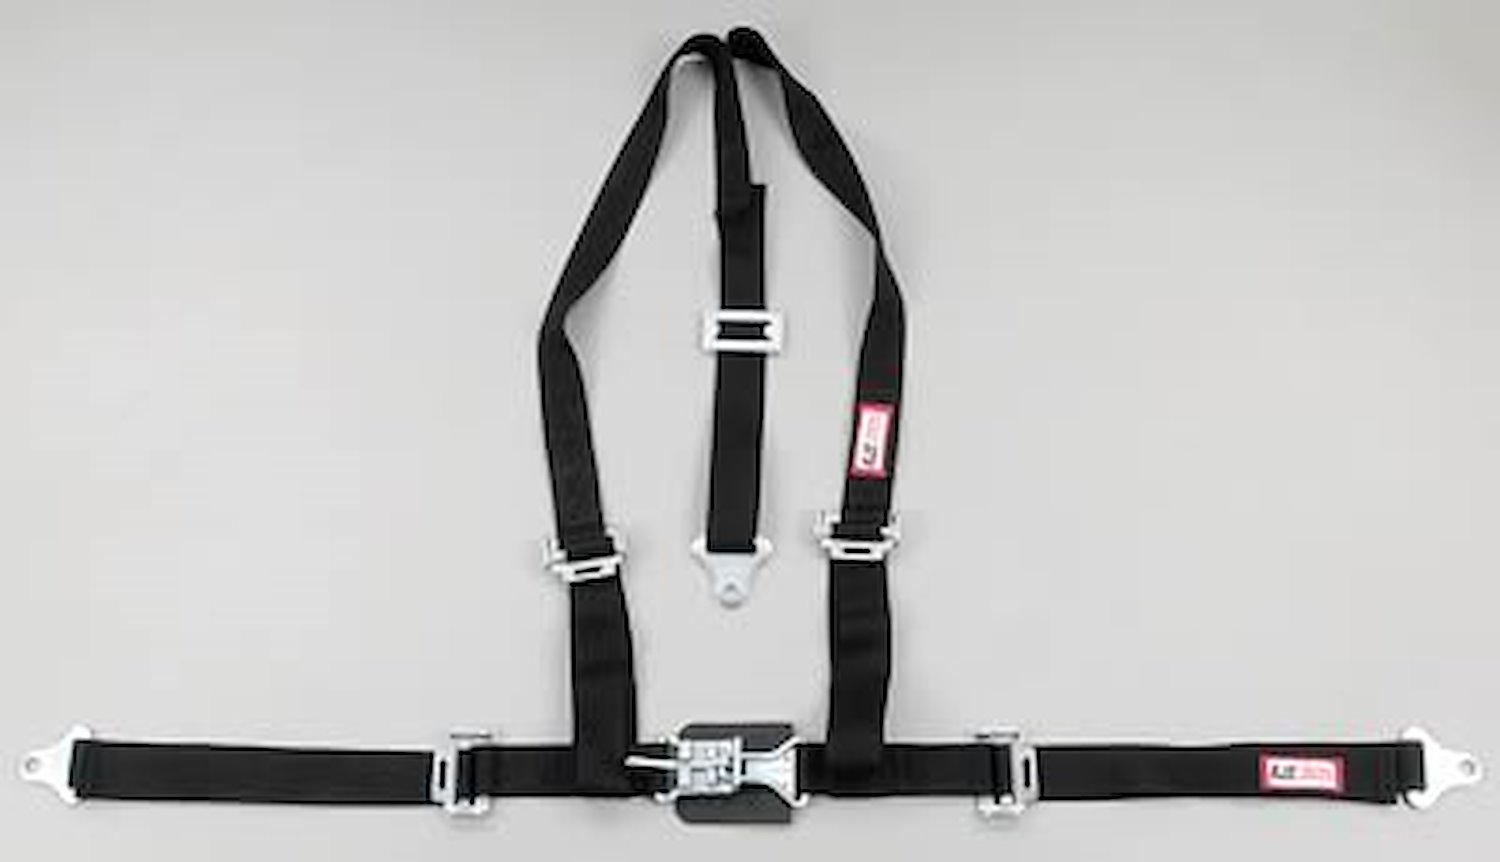 NON-SFI L&L HARNESS 2 PULL UP Lap Belt SNAP SEWN IN 2 S.H. INDIVIDUAL FLOOR Mount w/STERNUM STRAP WRAP/BOLT OD GREEN